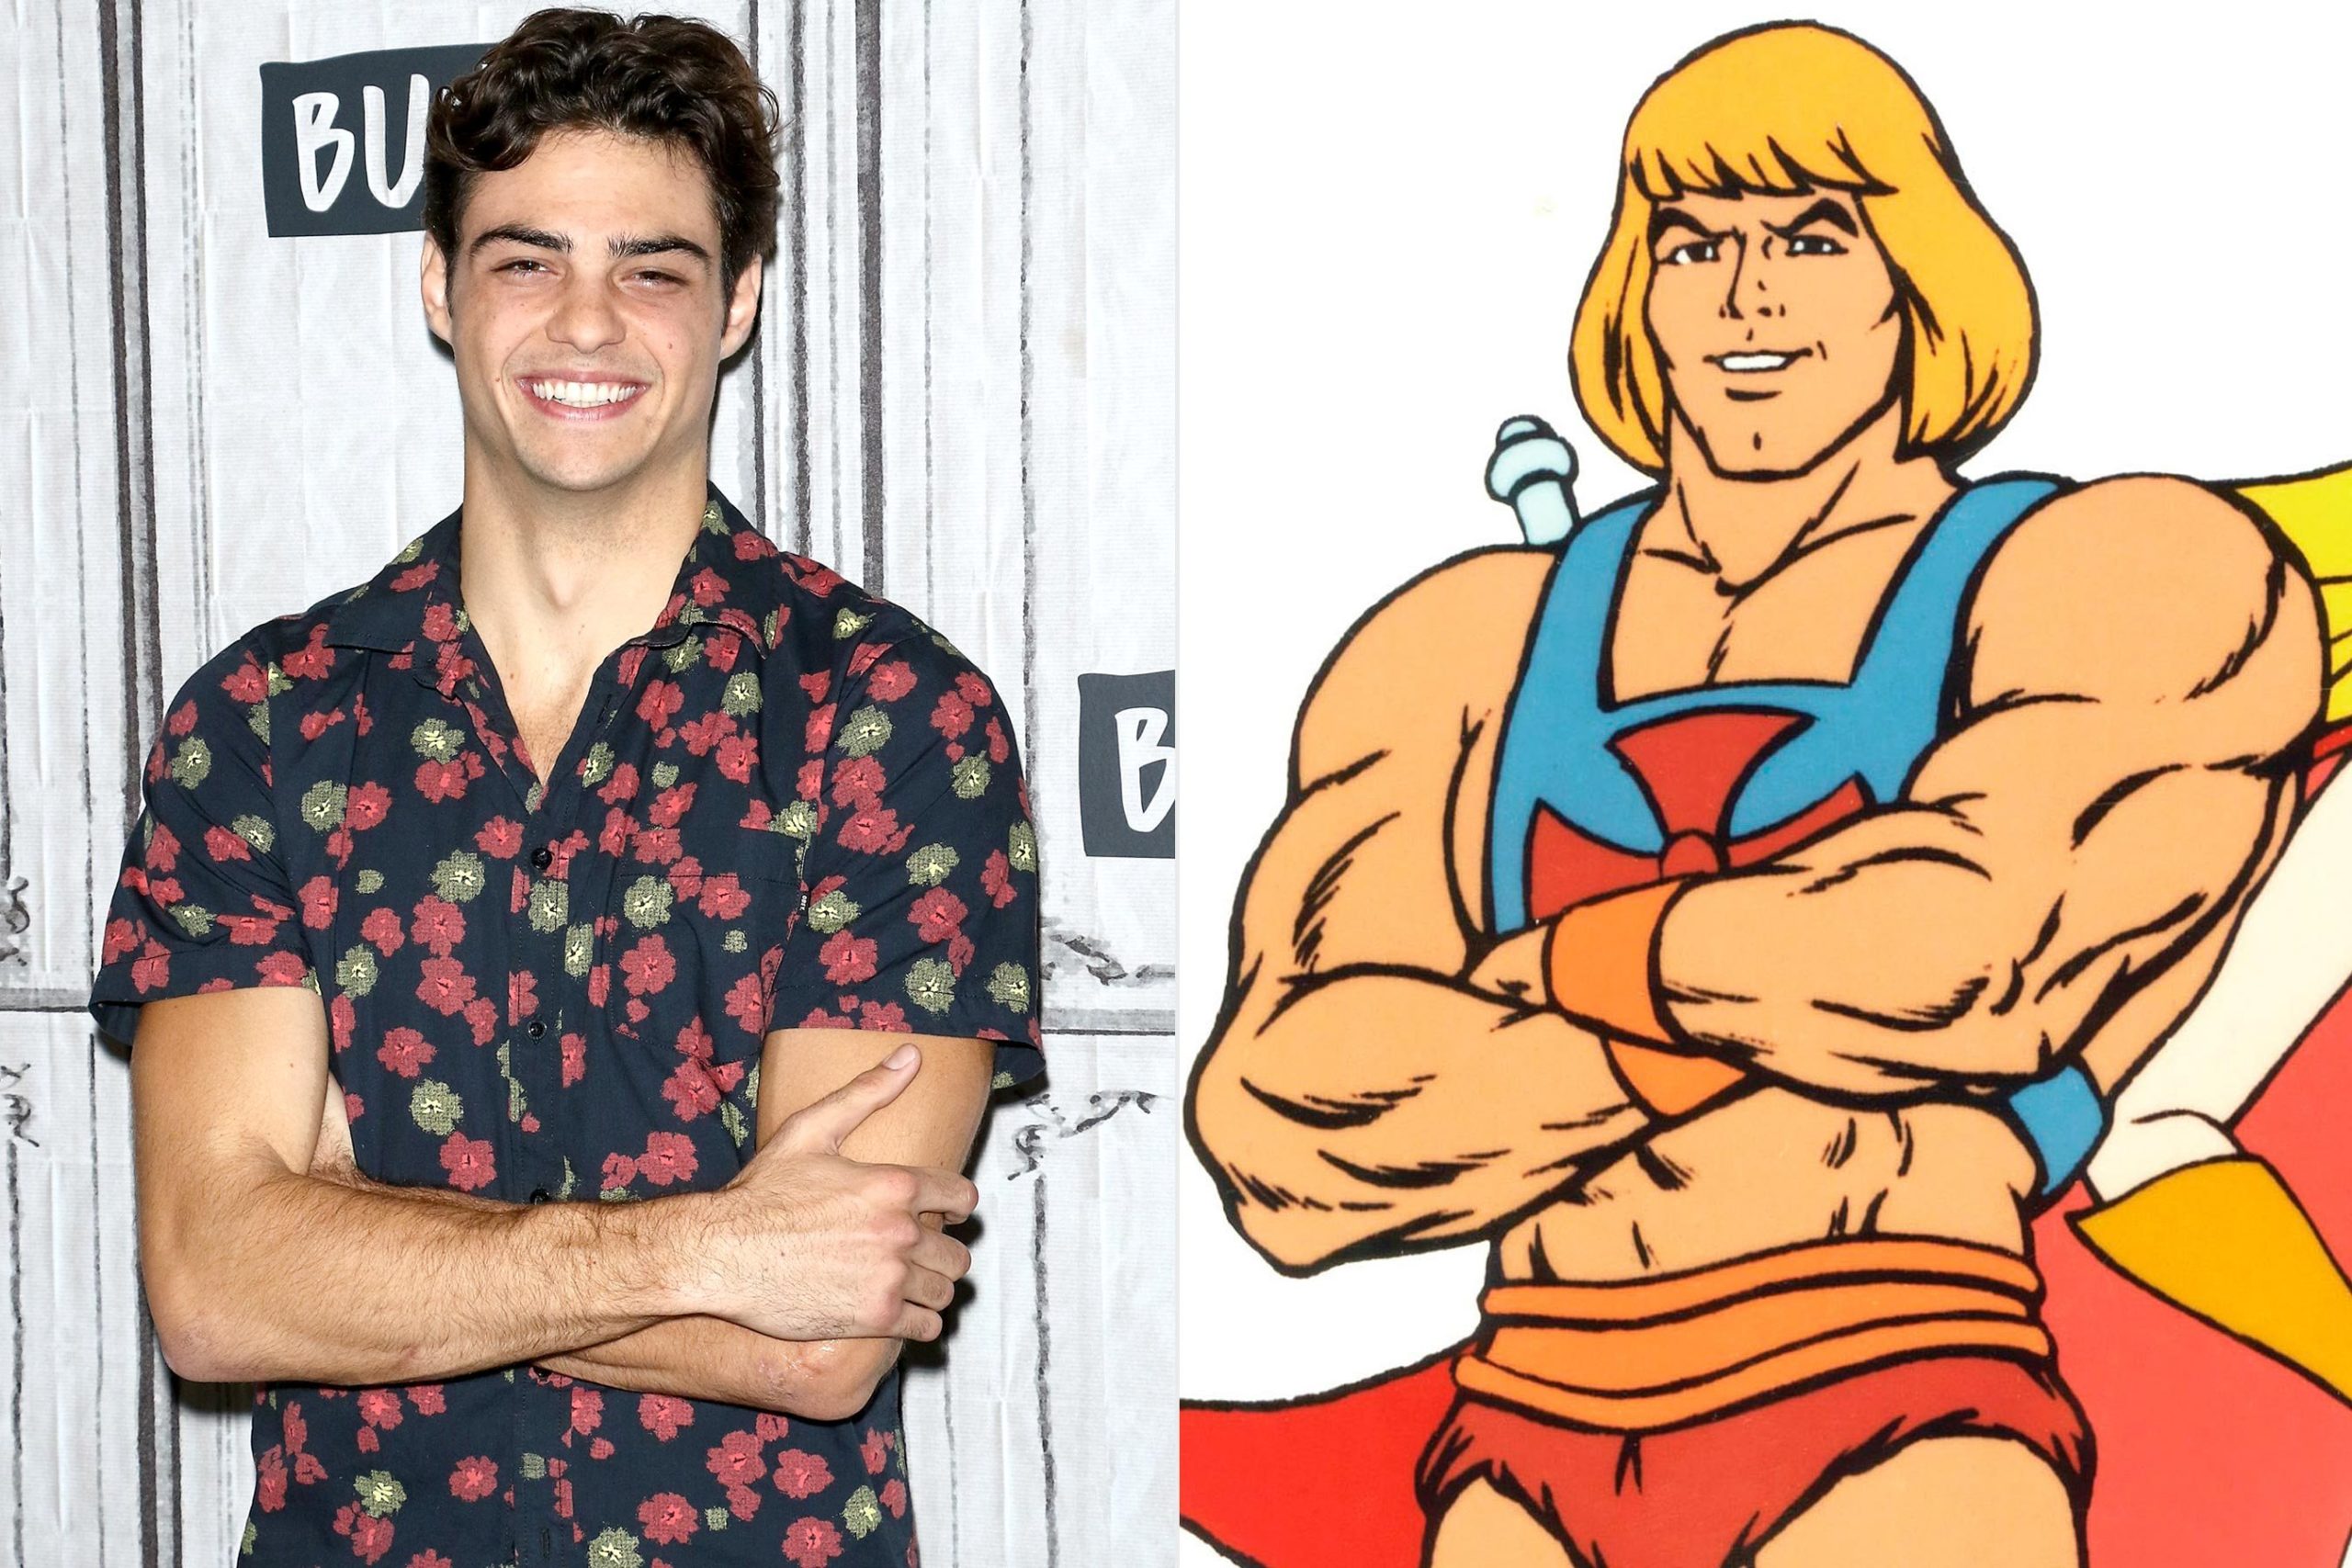 https://ew.com/movies/2019/03/20/noah-centineo-he-man-masters-of-the-universe-movie/